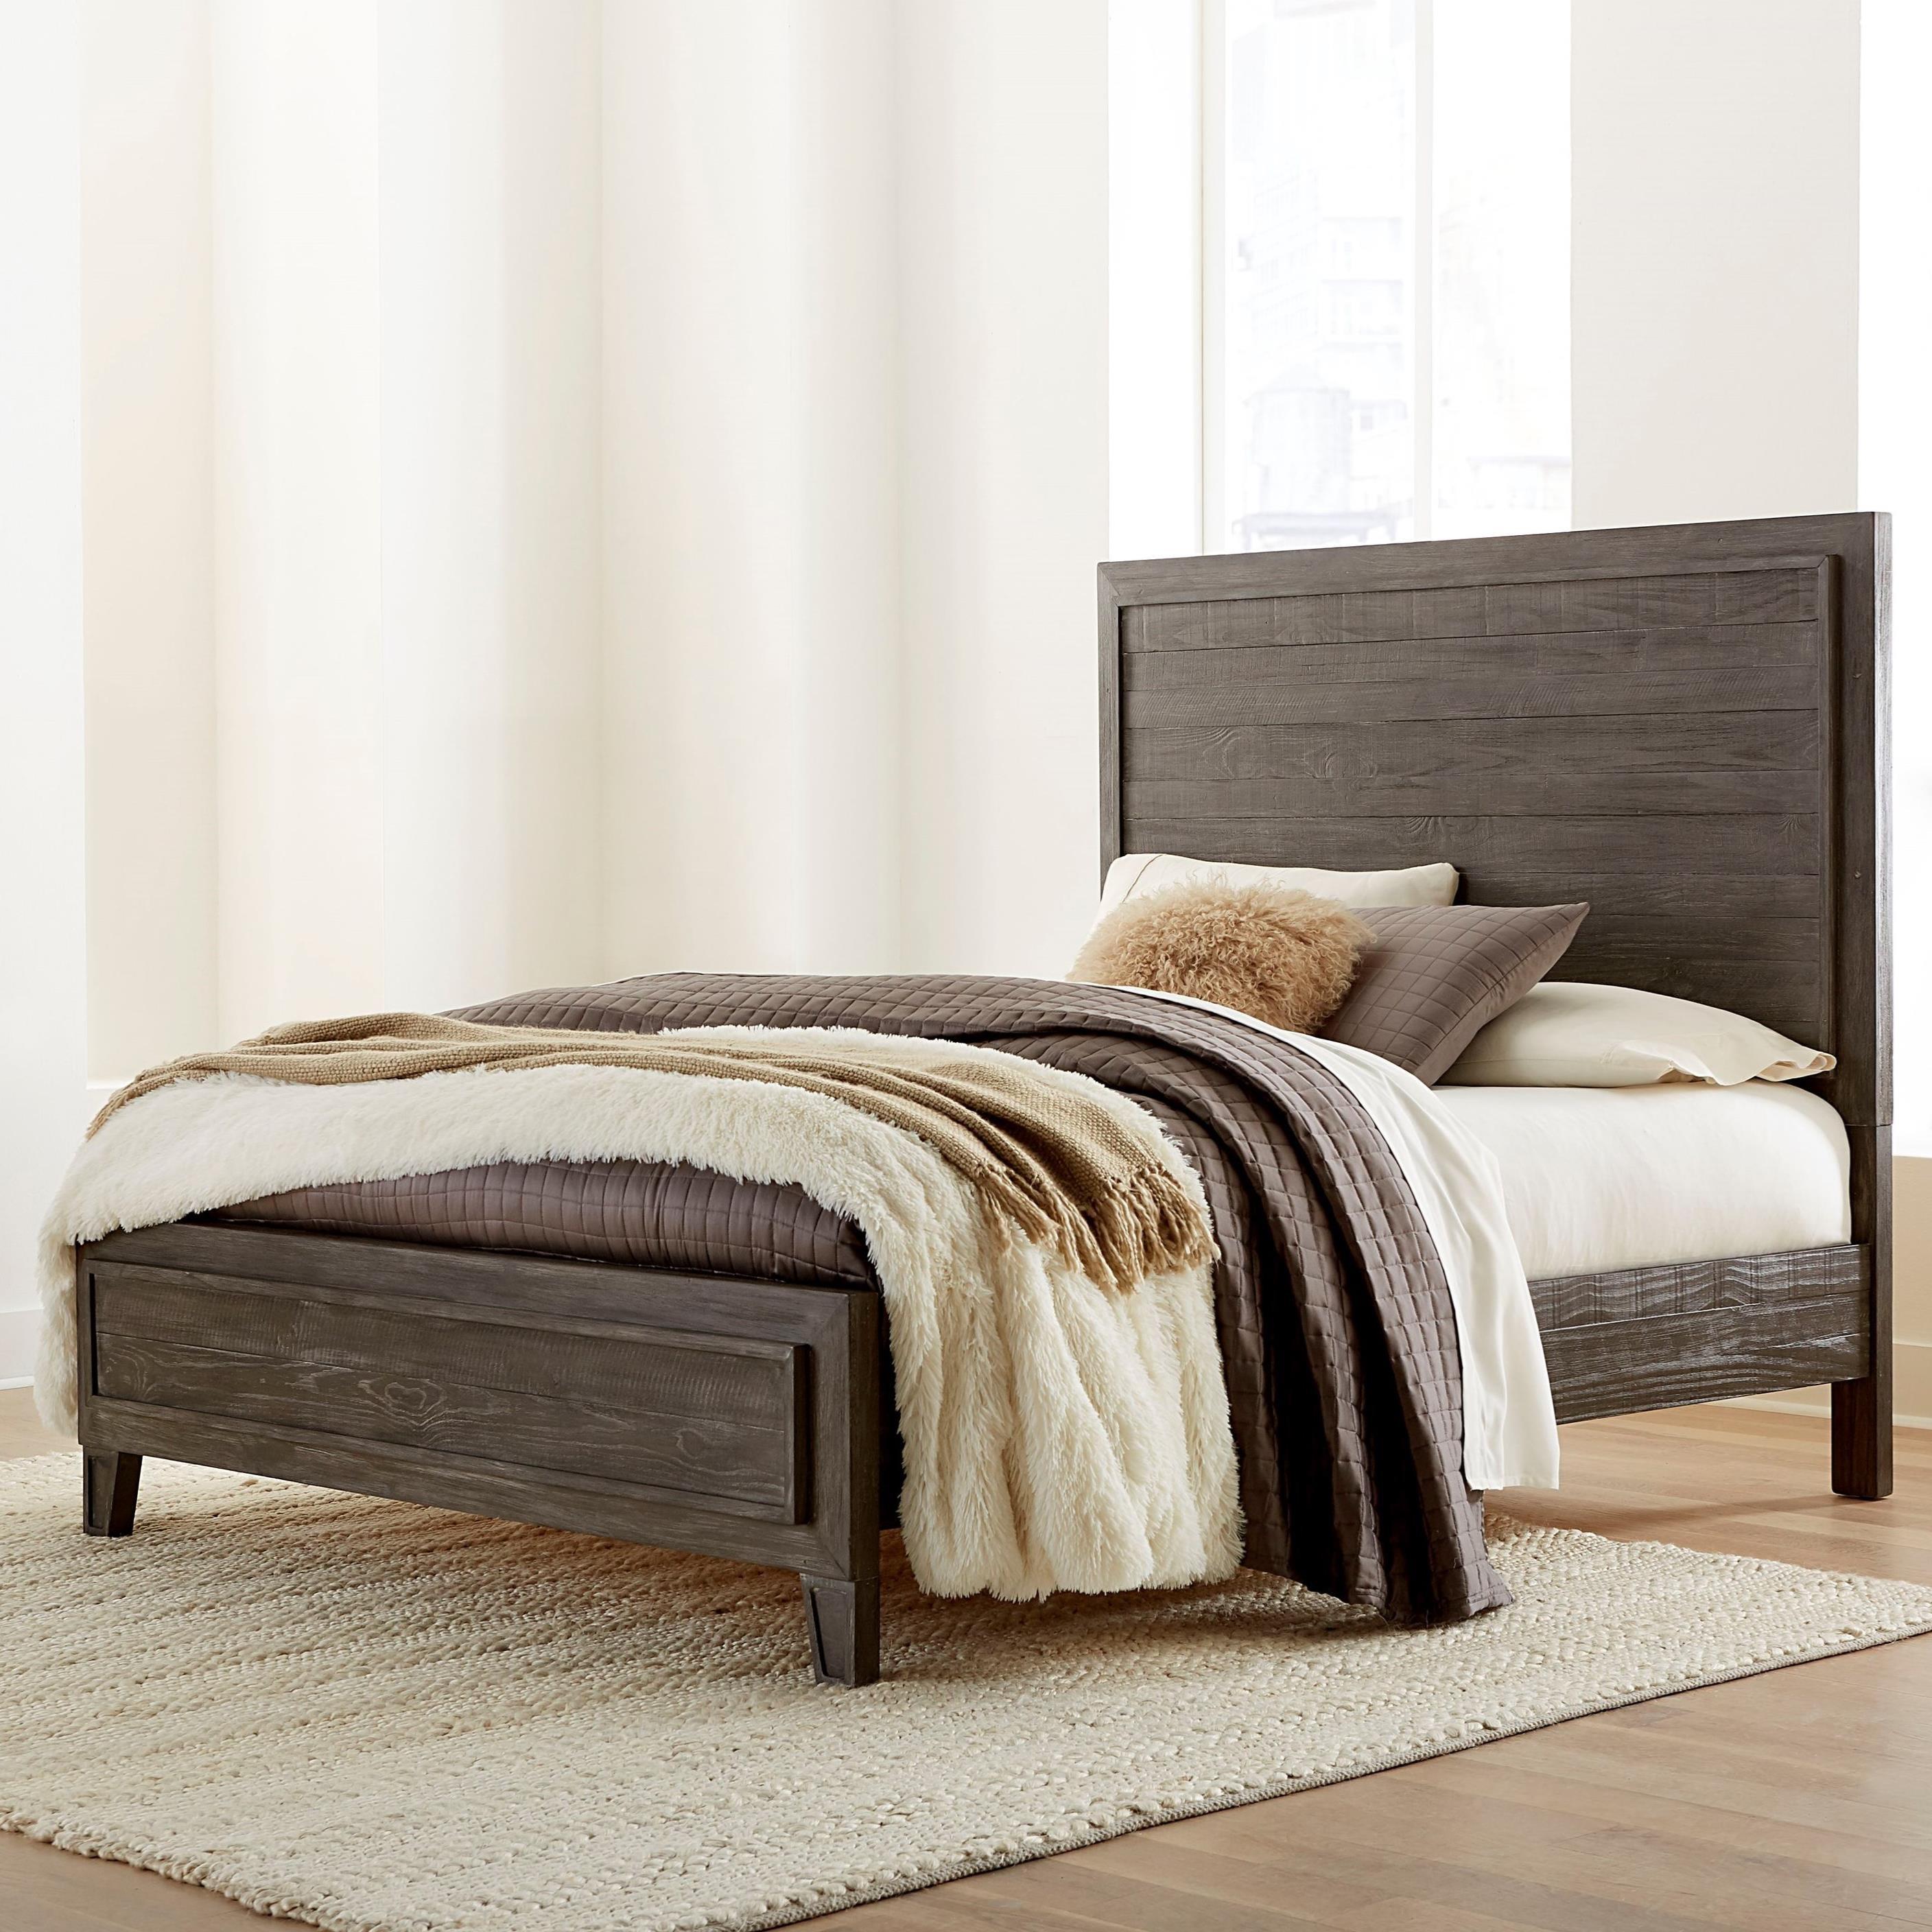 Casual, Rustic Panel Bed HADLEY A4H6A4 in Onyx 